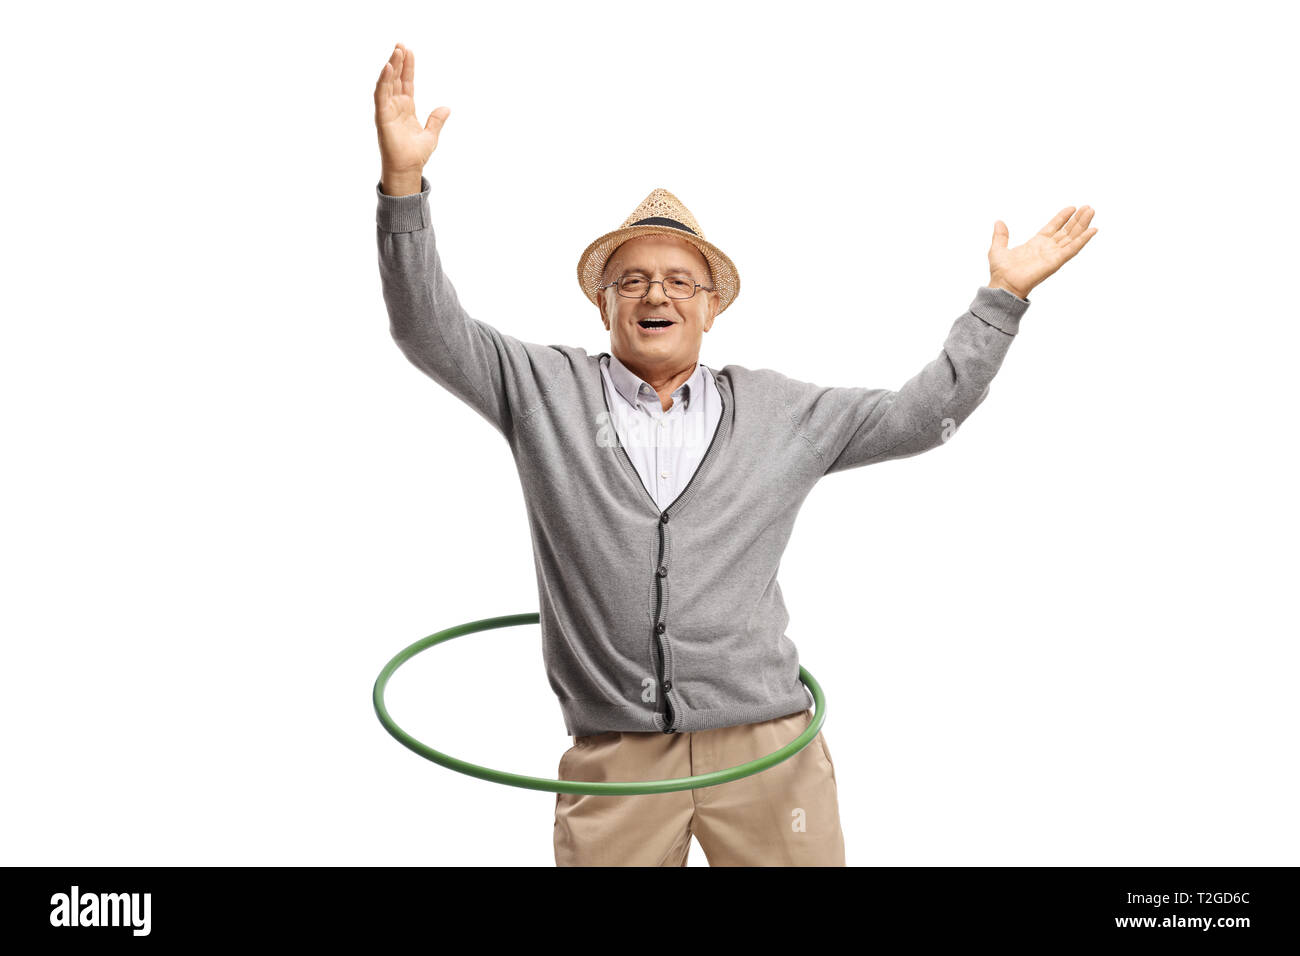 Happy mature man with a hula hoop isolated on white background Stock Photo